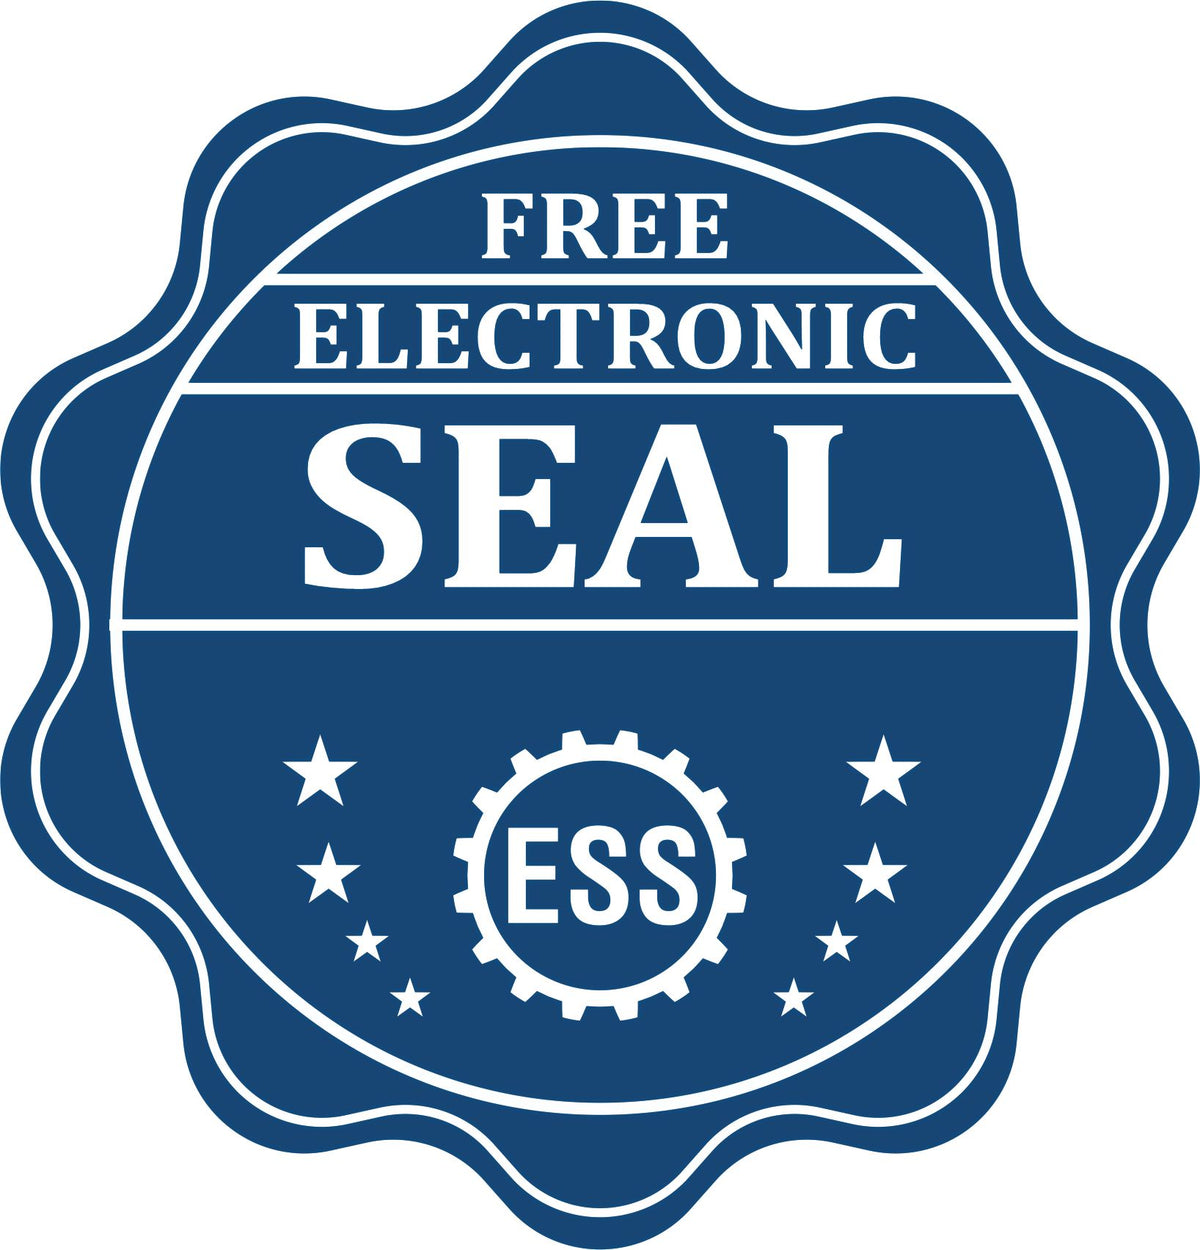 A badge showing a free electronic seal for the Slim Pre-Inked Massachusetts Professional Geologist Seal Stamp with stars and the ESS gear on the emblem.